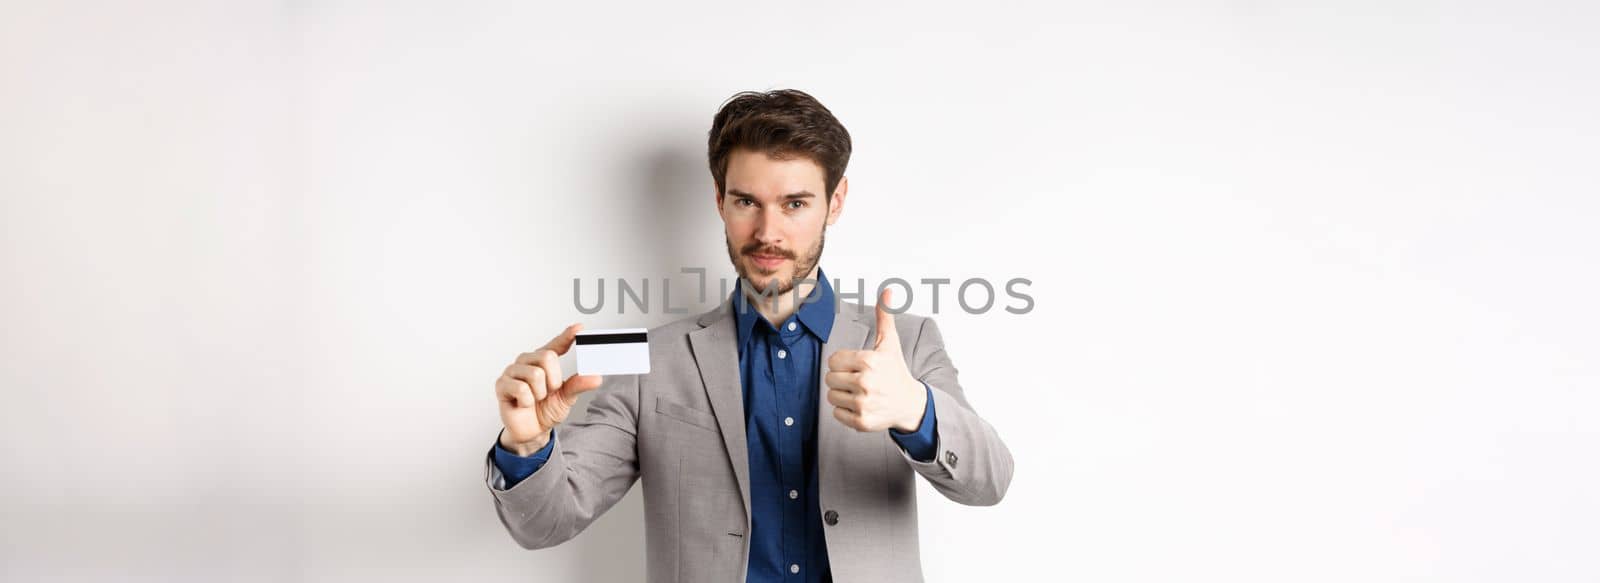 Very good bank. Businessman in suit show plastic credit card and thumb-up, recommending, standing on white background.